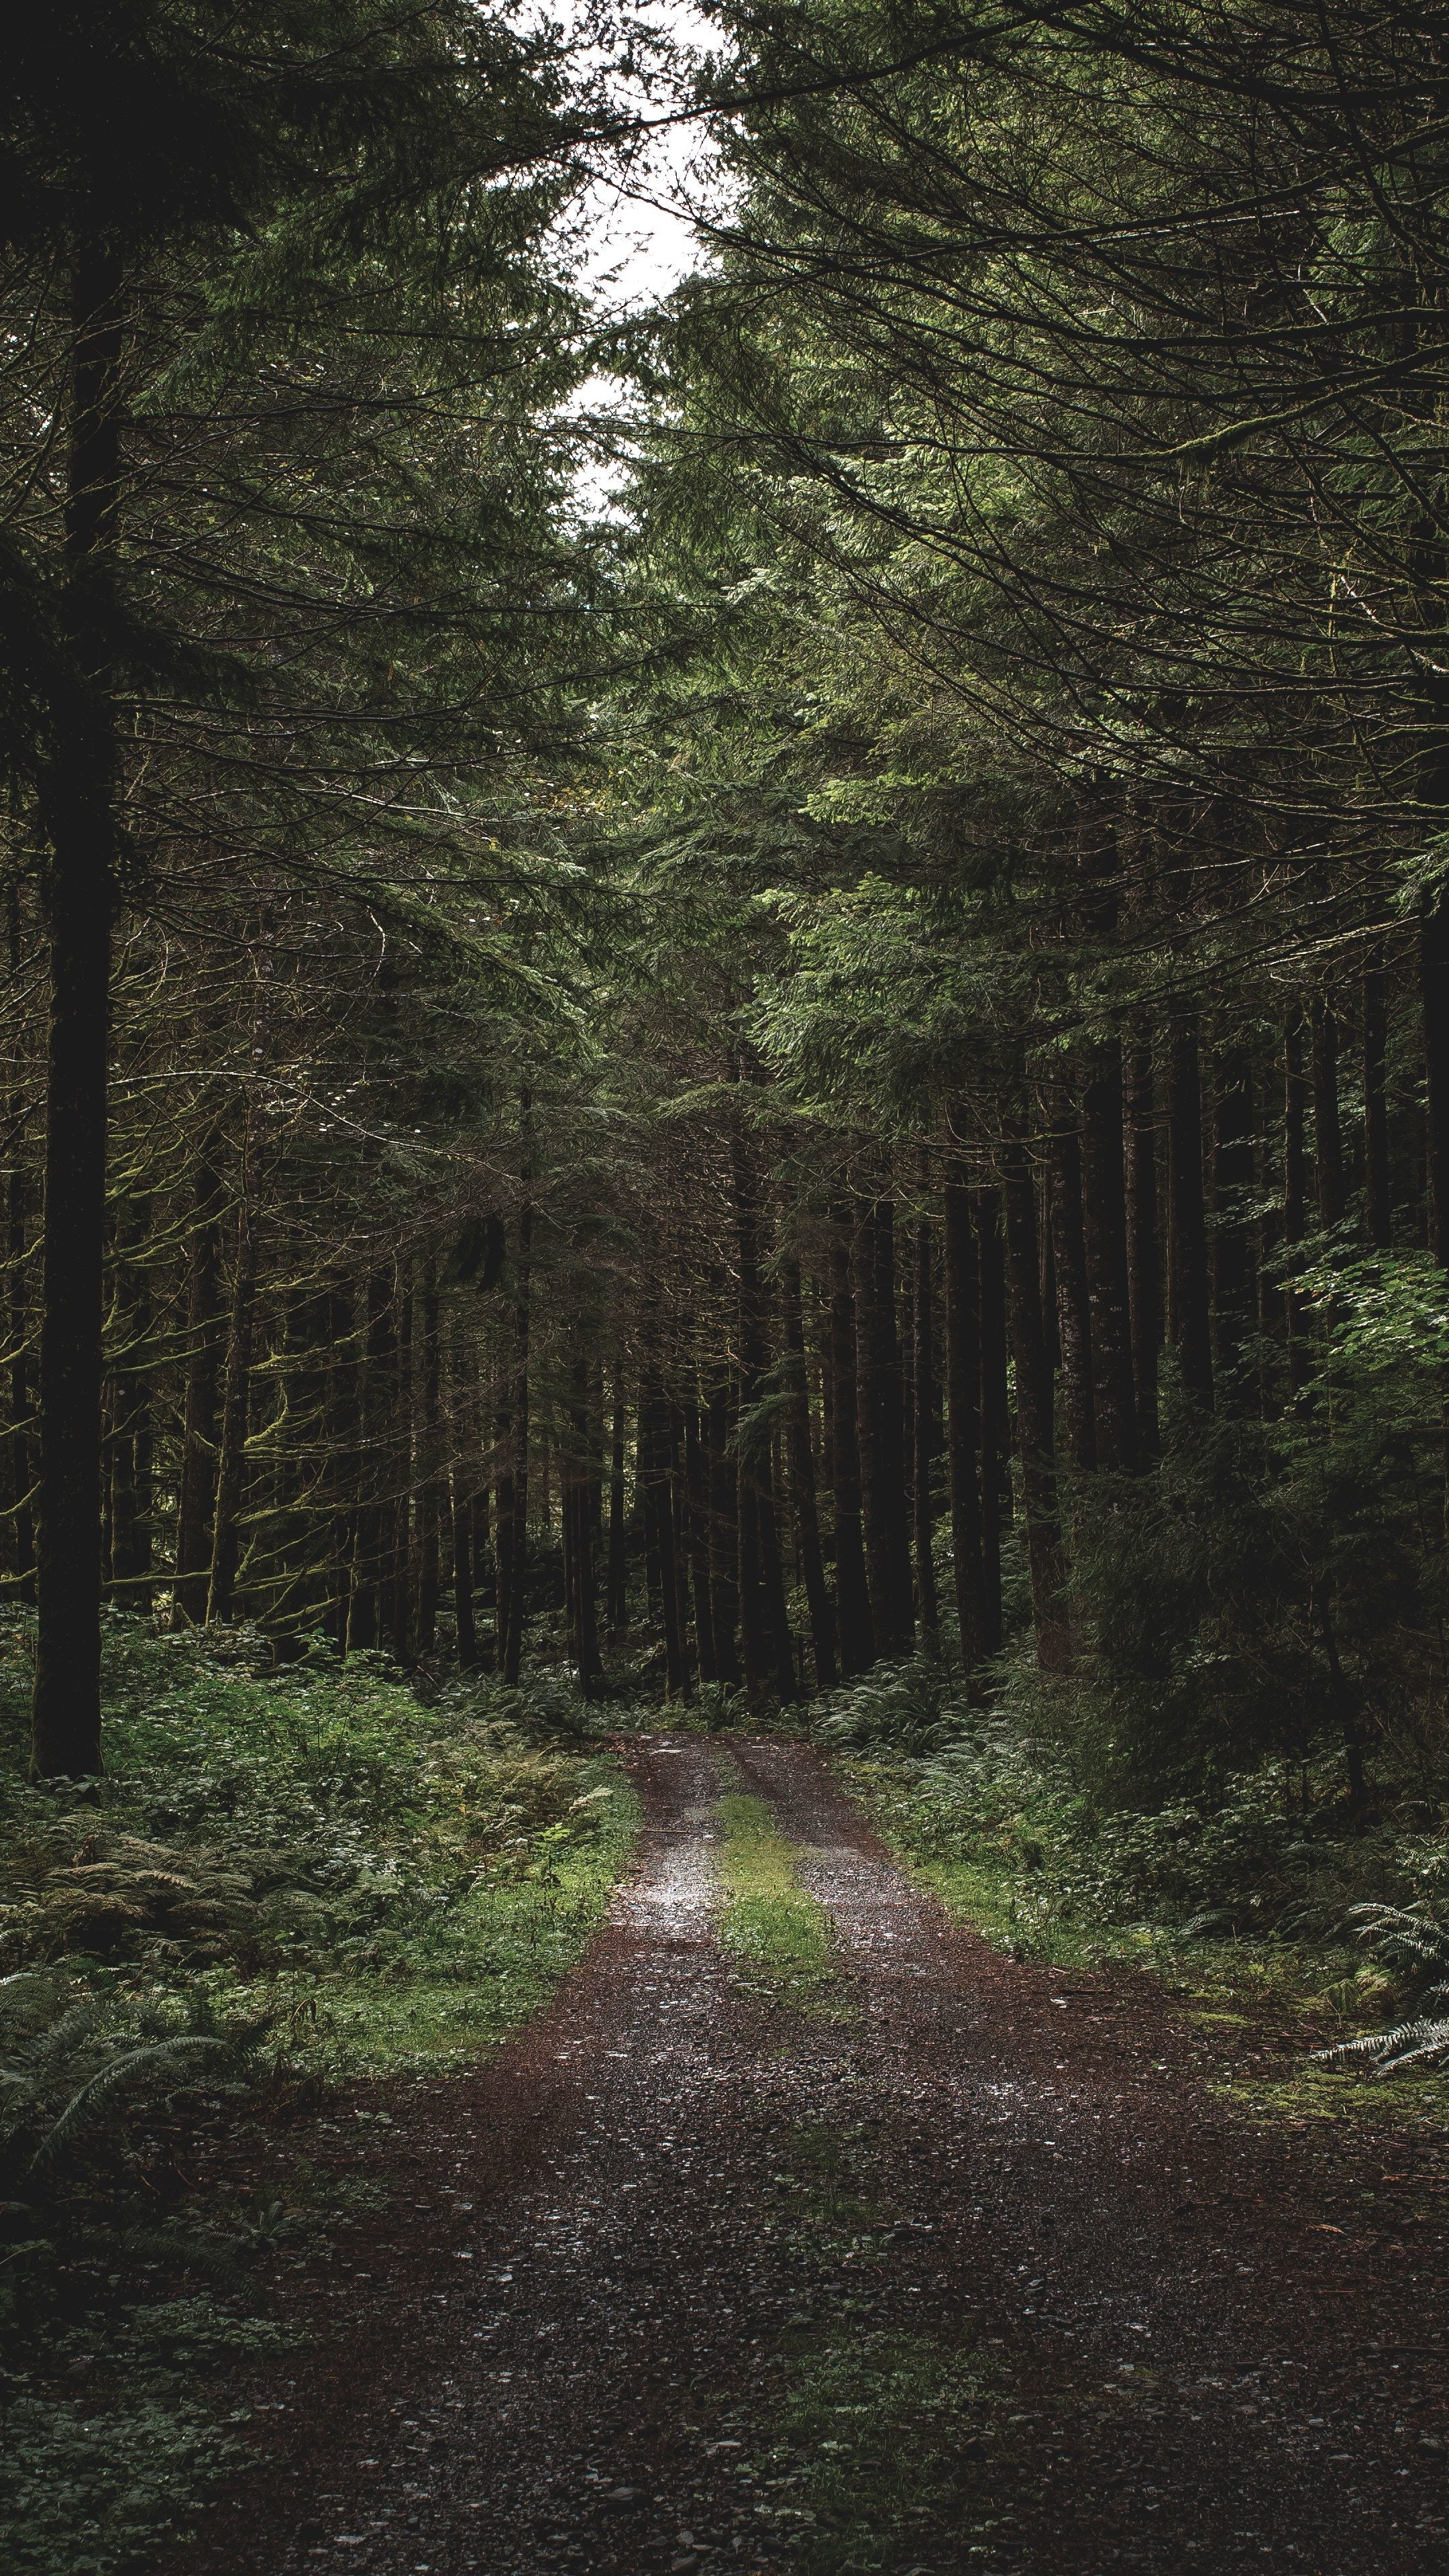 Dirt road in forest, Nature's traverse, Rustic pathway, Nature's carpet, 2160x3840 4K Phone